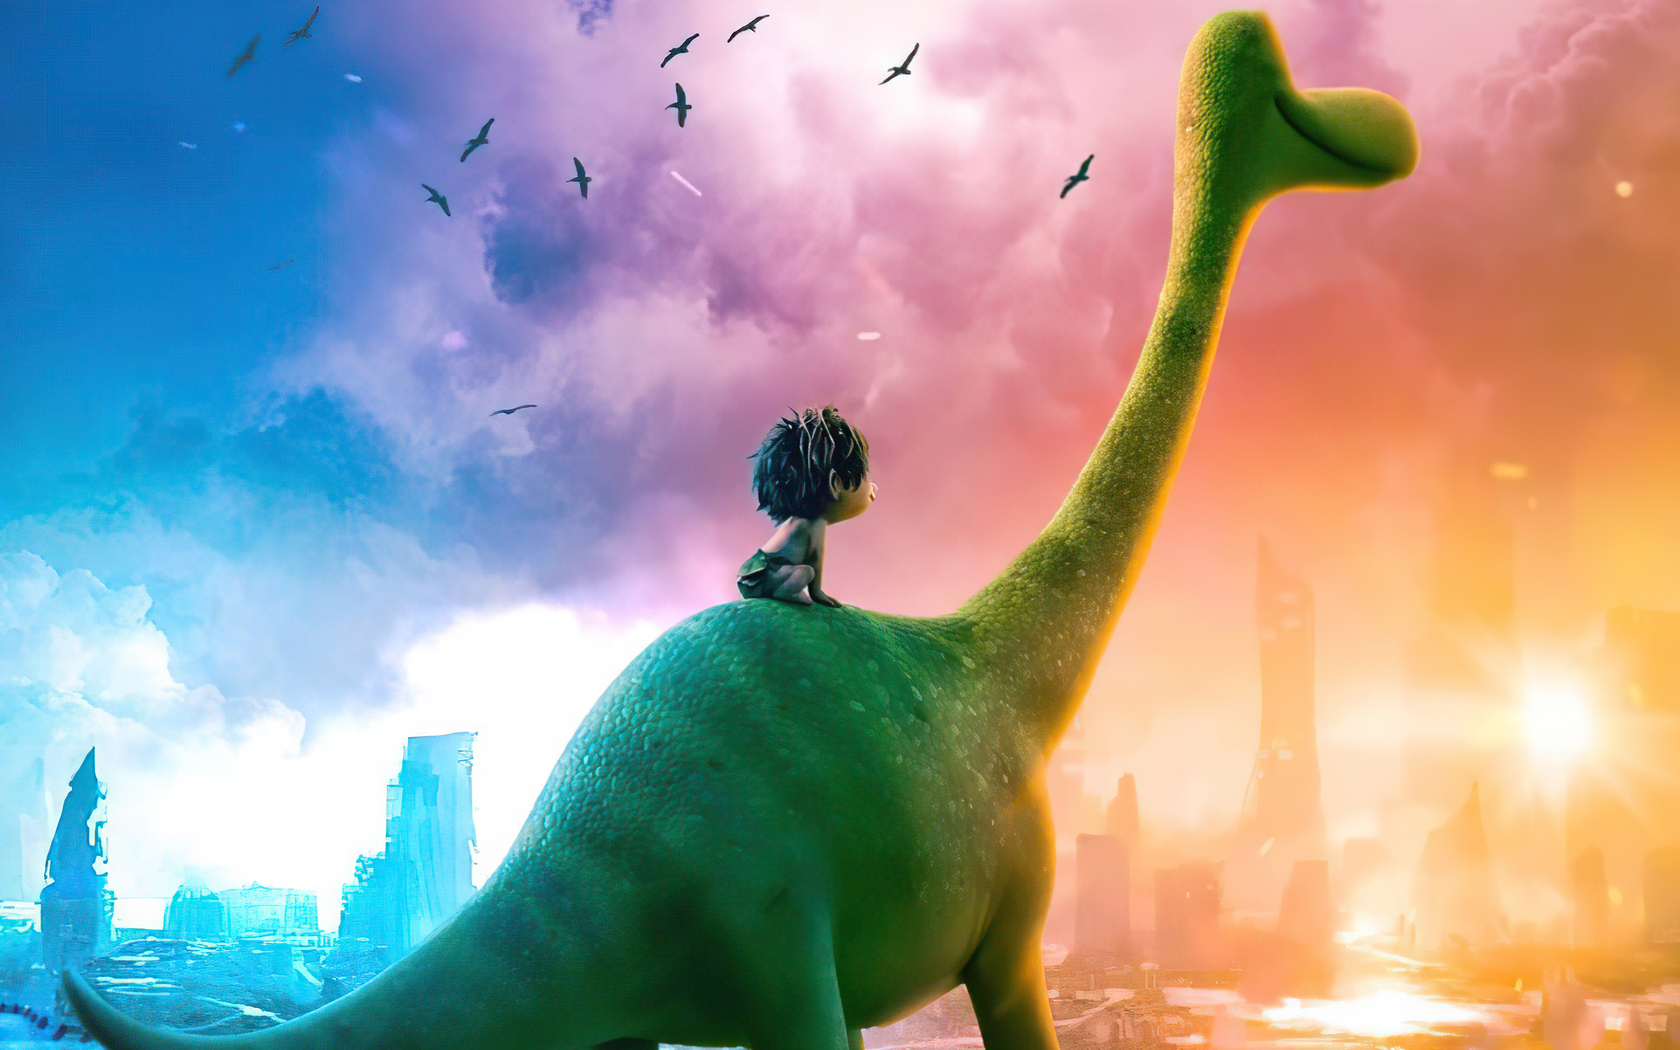 3840x1942 the good dinosaur 4k cool wallpaper hd - Coolwallpapers.me!